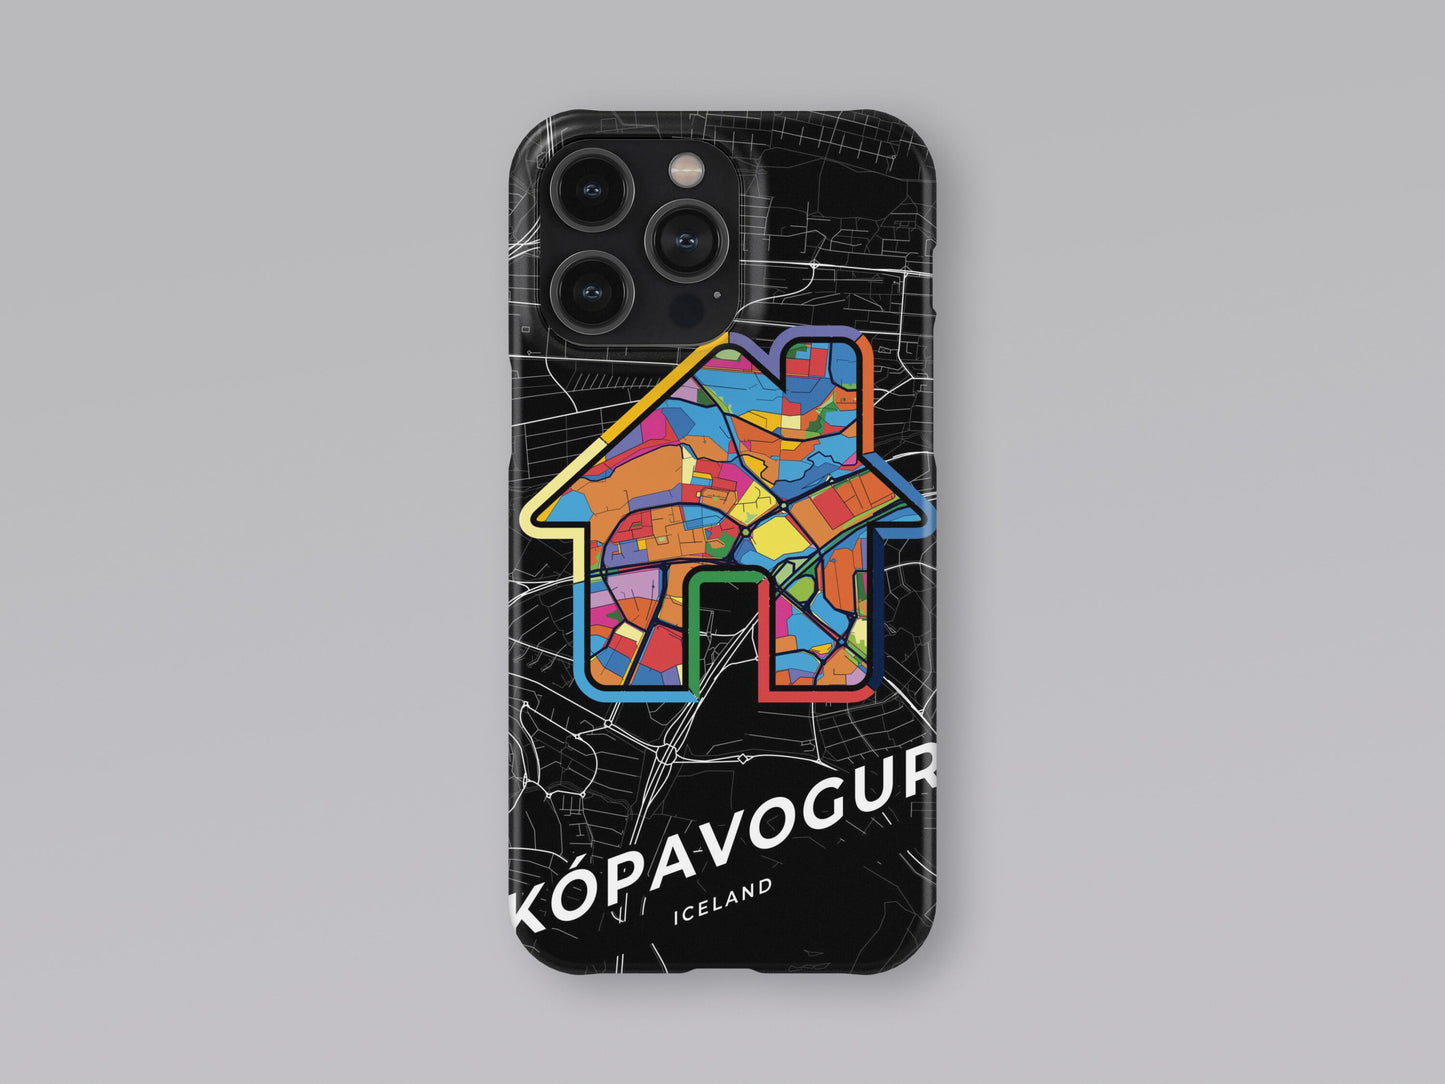 Kópavogur Iceland slim phone case with colorful icon. Birthday, wedding or housewarming gift. Couple match cases. 3